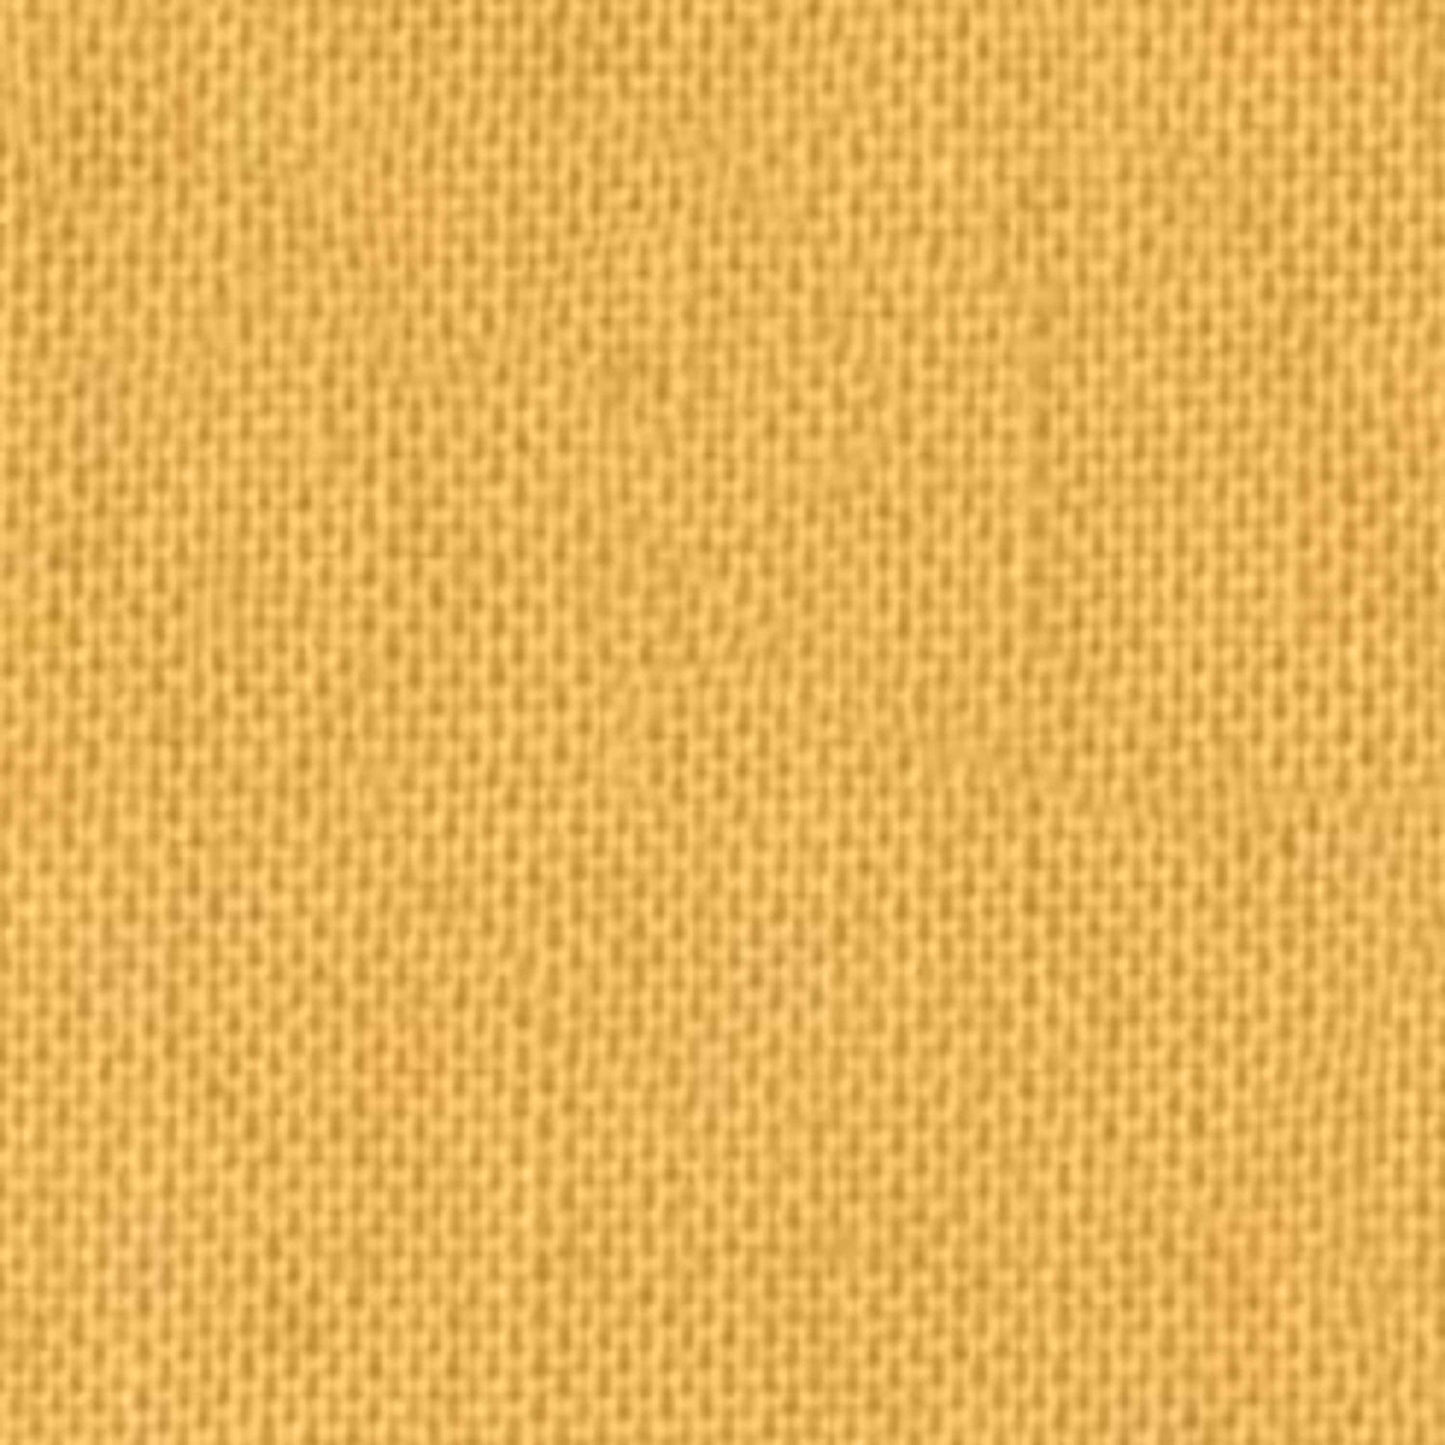 Fabric By The Yard - Honey Cotton Couture Fabric - SC5333-HONE